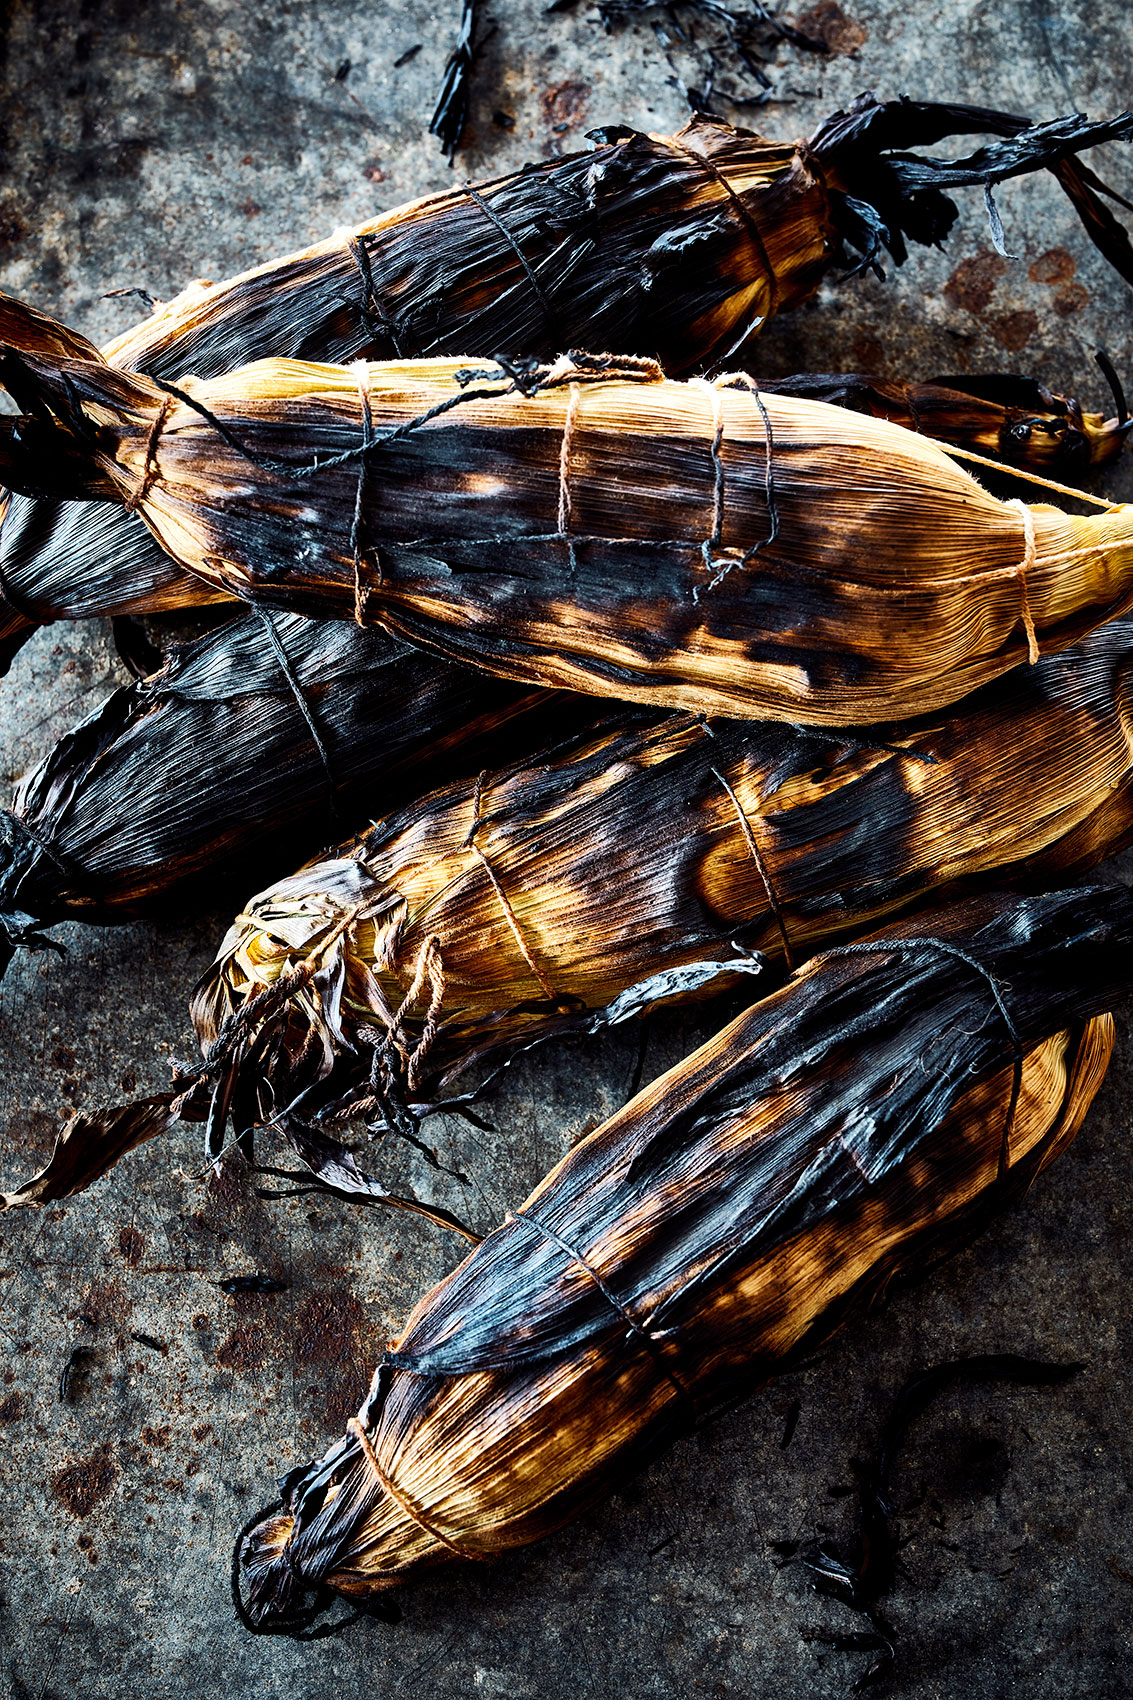 Shared Kitchen • Grilled Corn Bound & Charred with Husk • Lifestyle & Editorial Food Photography